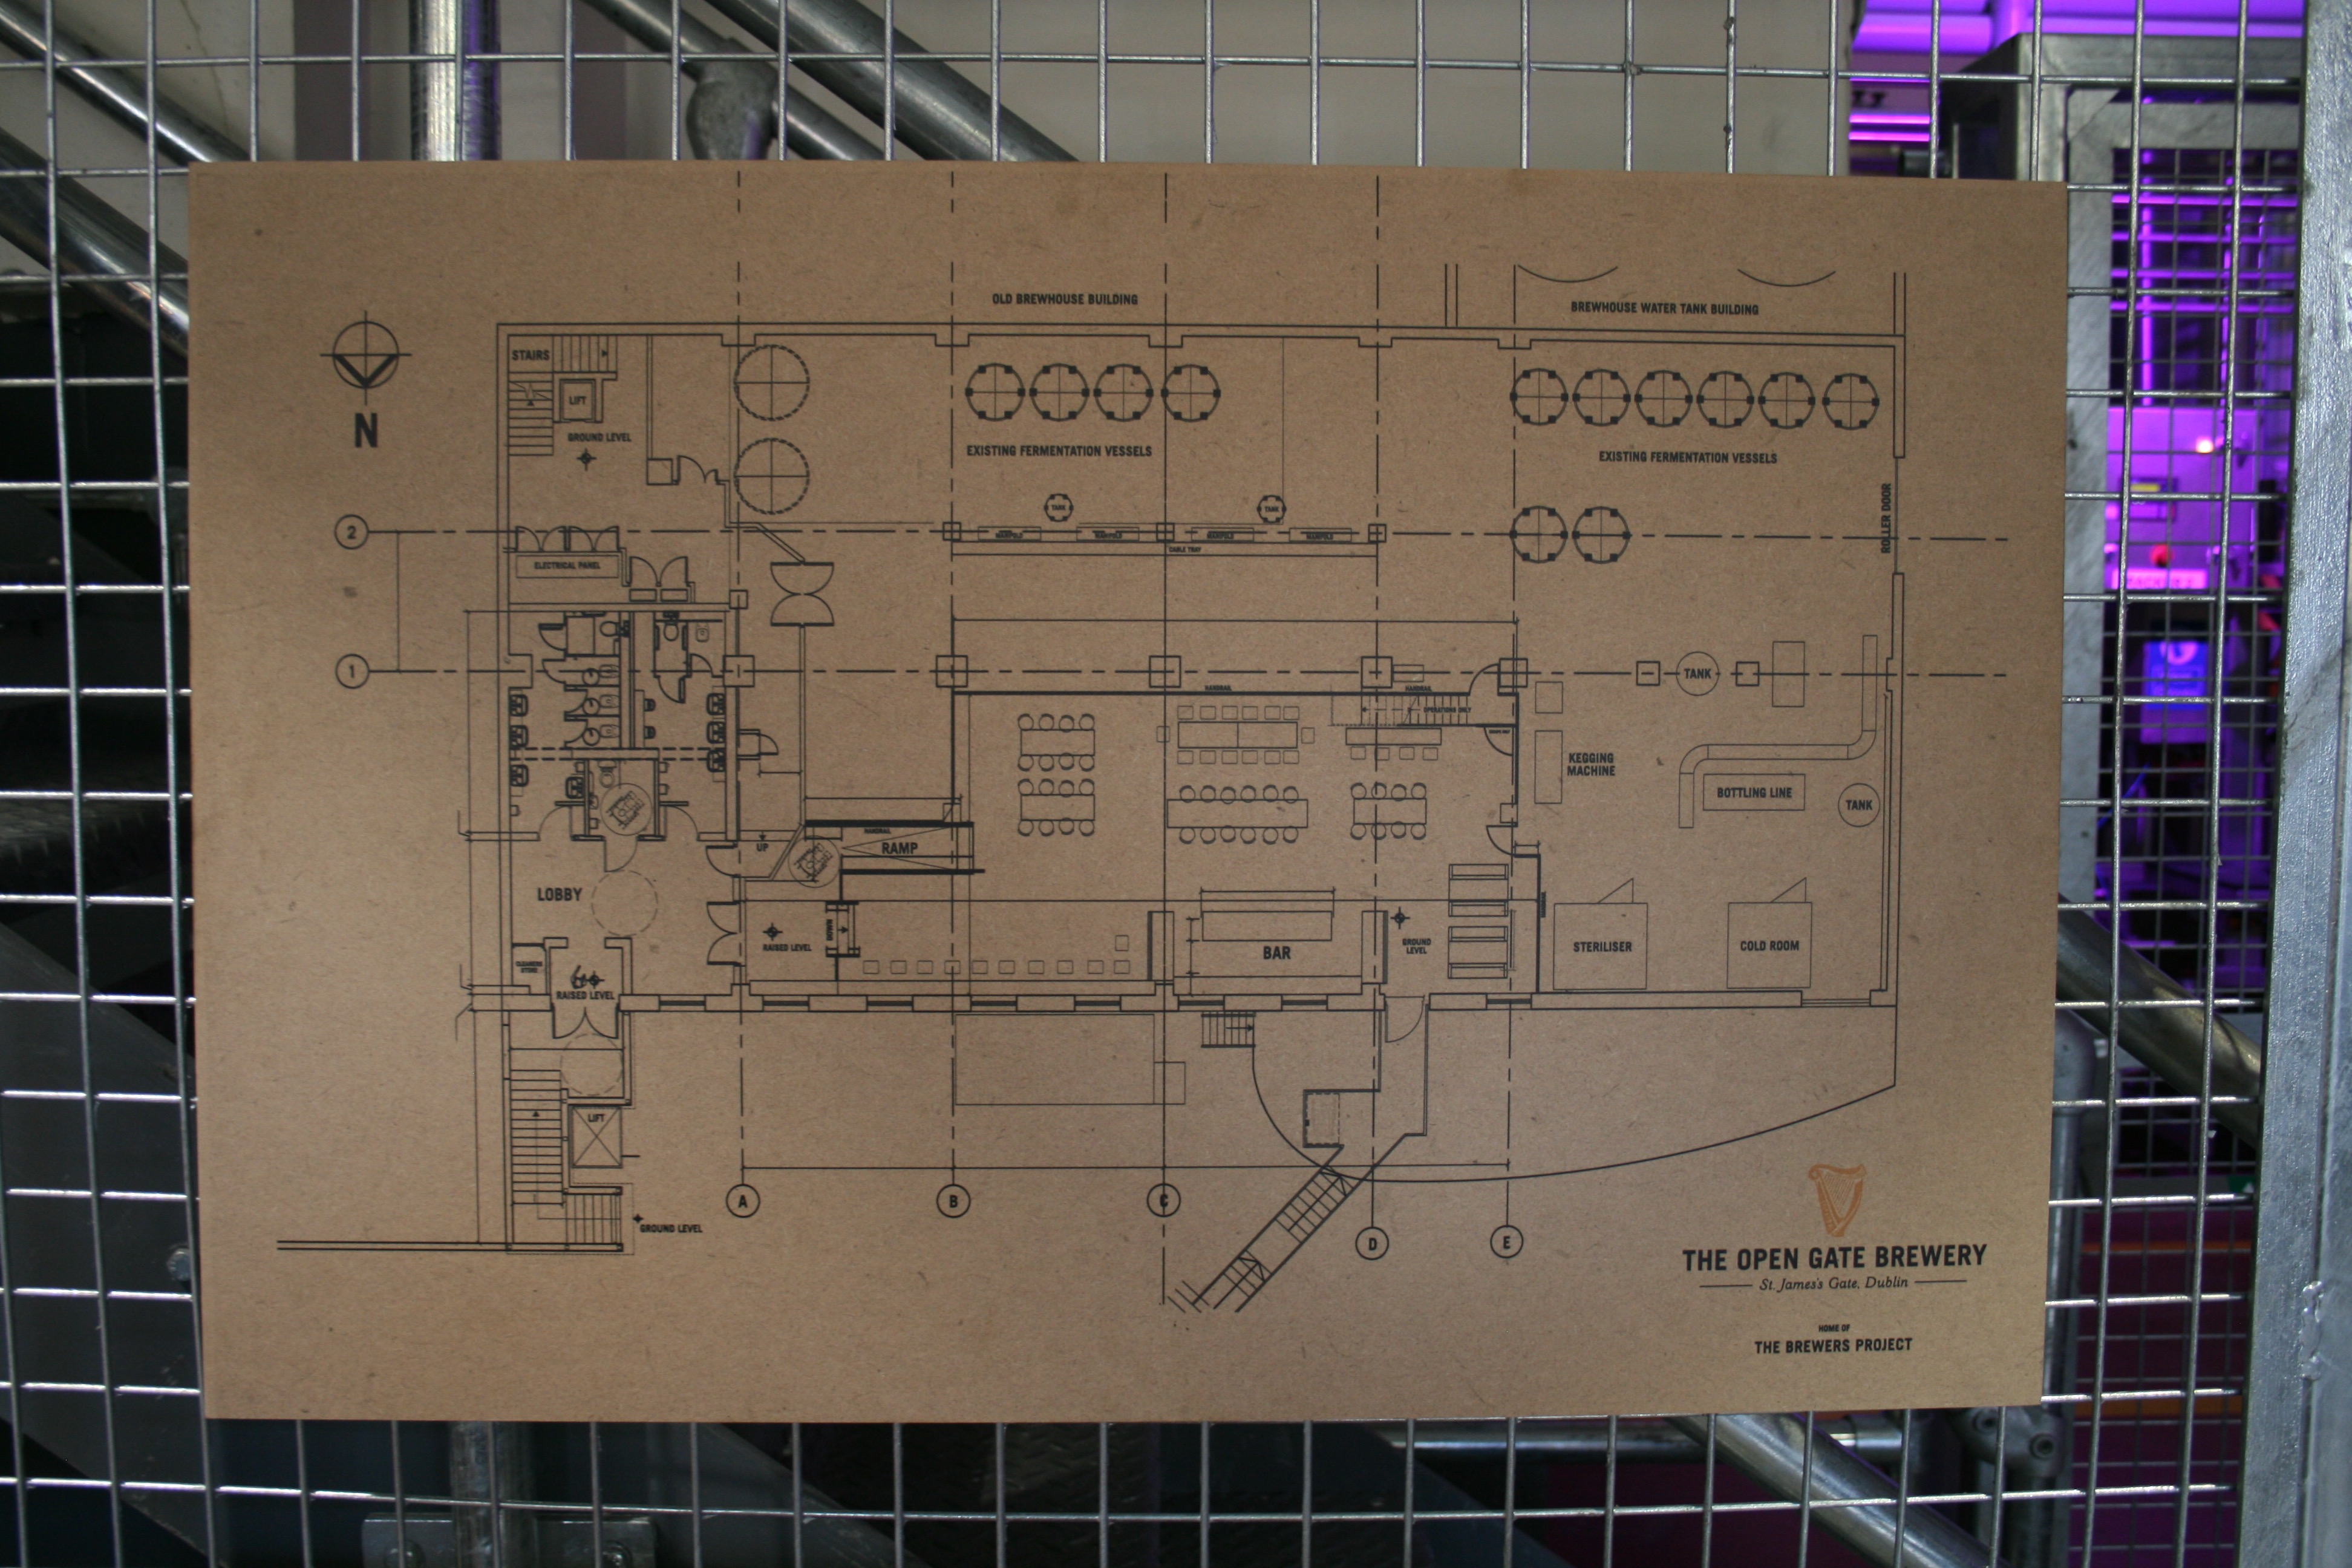 Floor layout at The Open Gate Brewery where Guinness brewers are allowed to experiment.